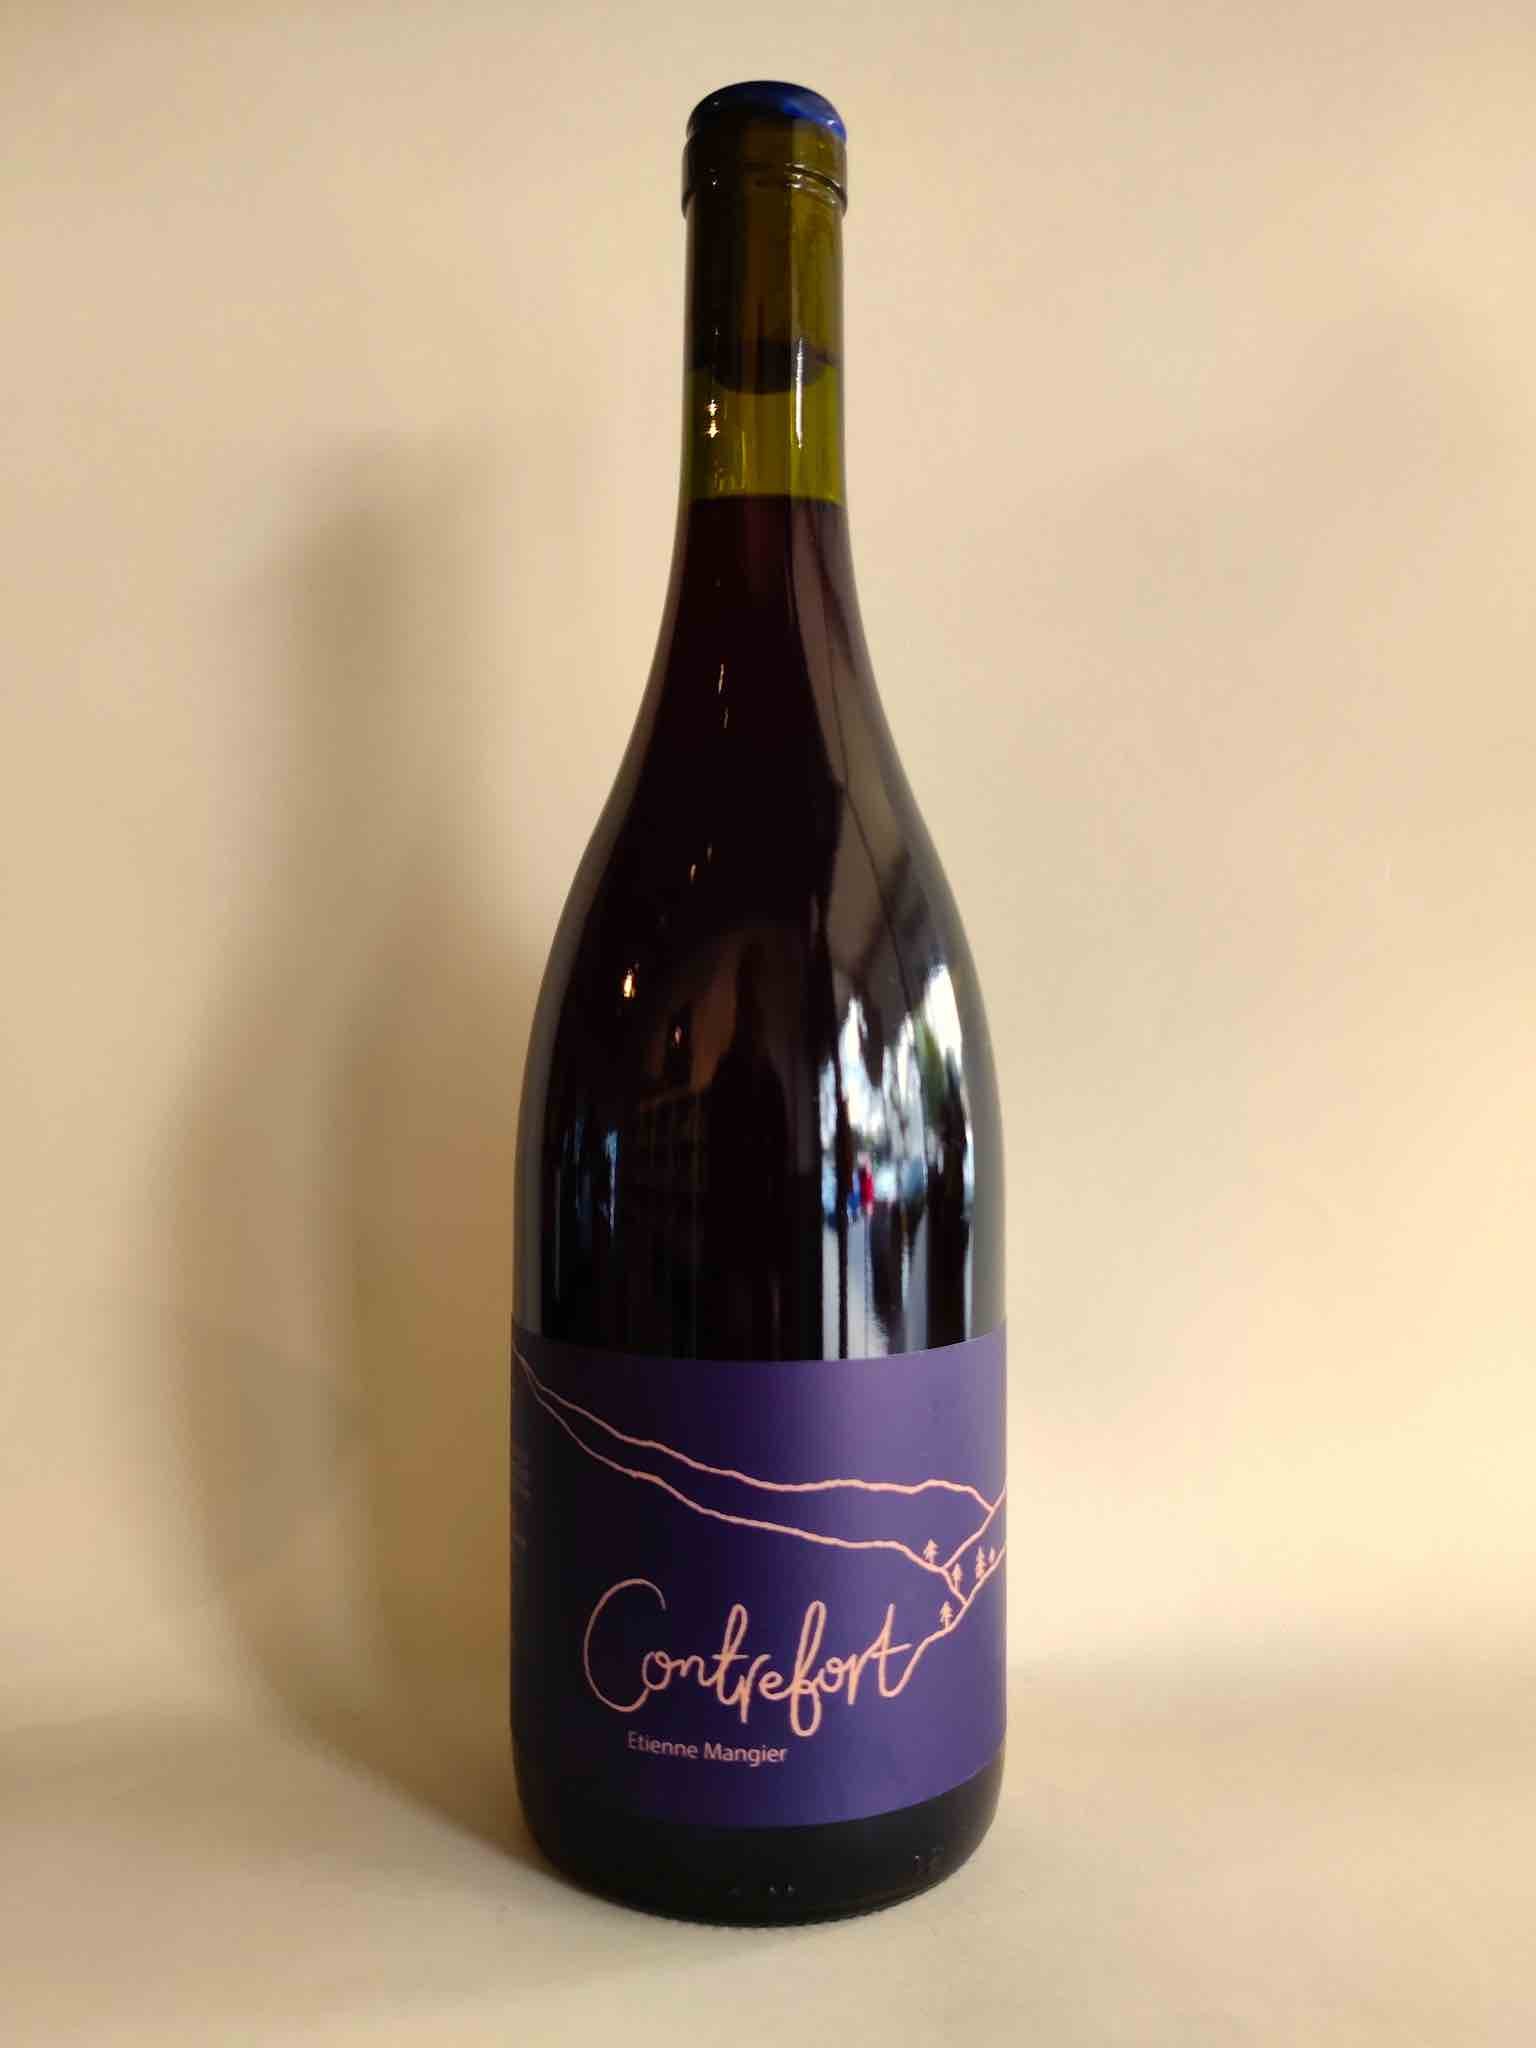 A 750ml bottle of Contrefort Pinot Noir from the Macedon Ranges, Victoria. 